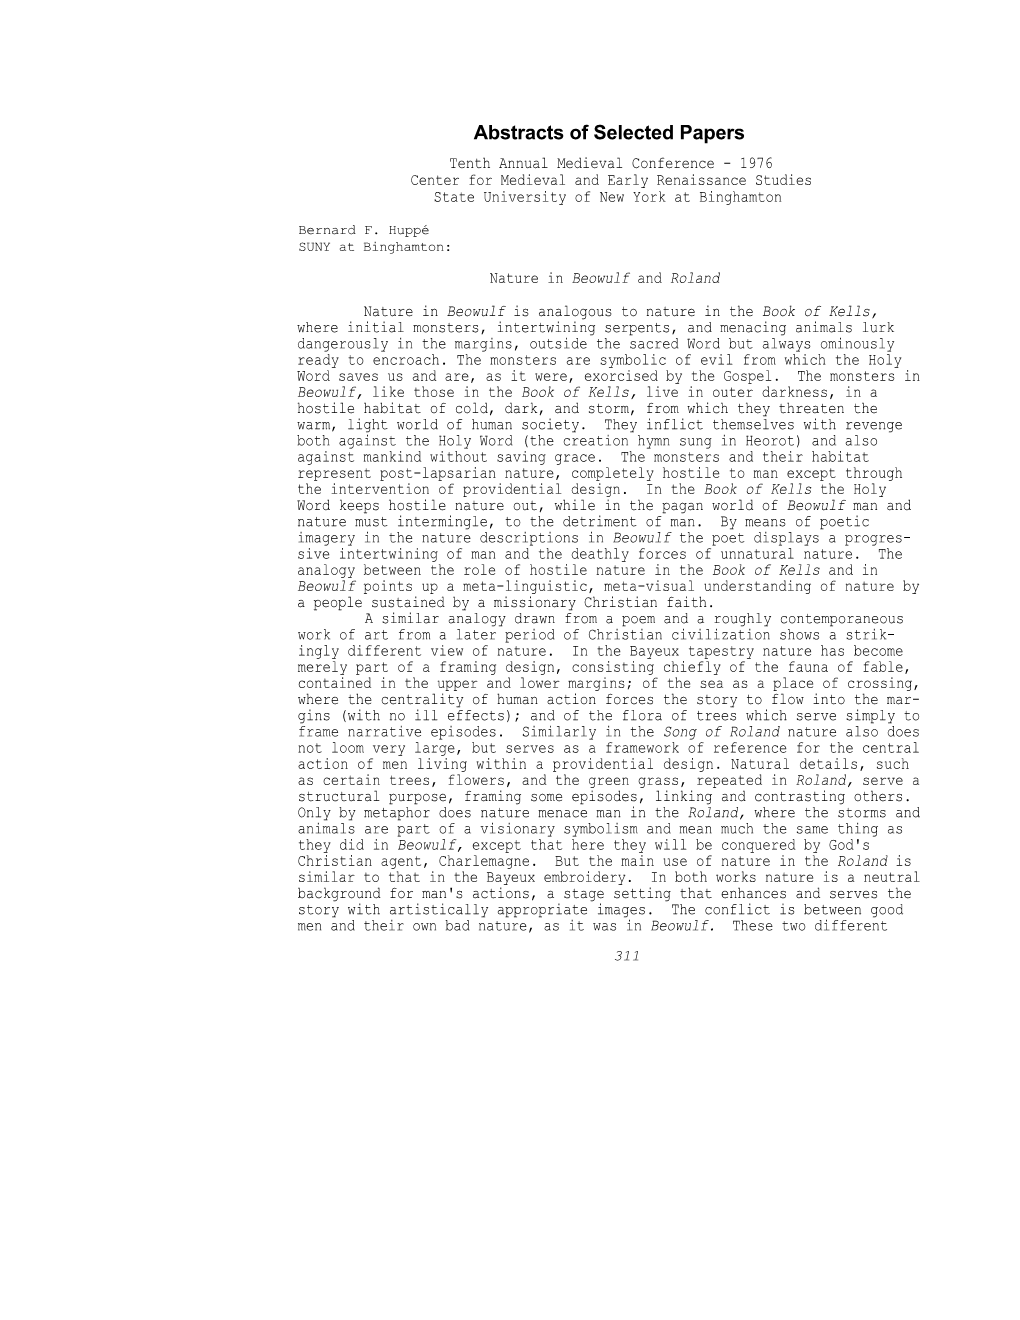 Abstracts of Selected Papers Tenth Annual Medieval Conference - 1976 Center for Medieval and Early Renaissance Studies State University of New York at Binghamton